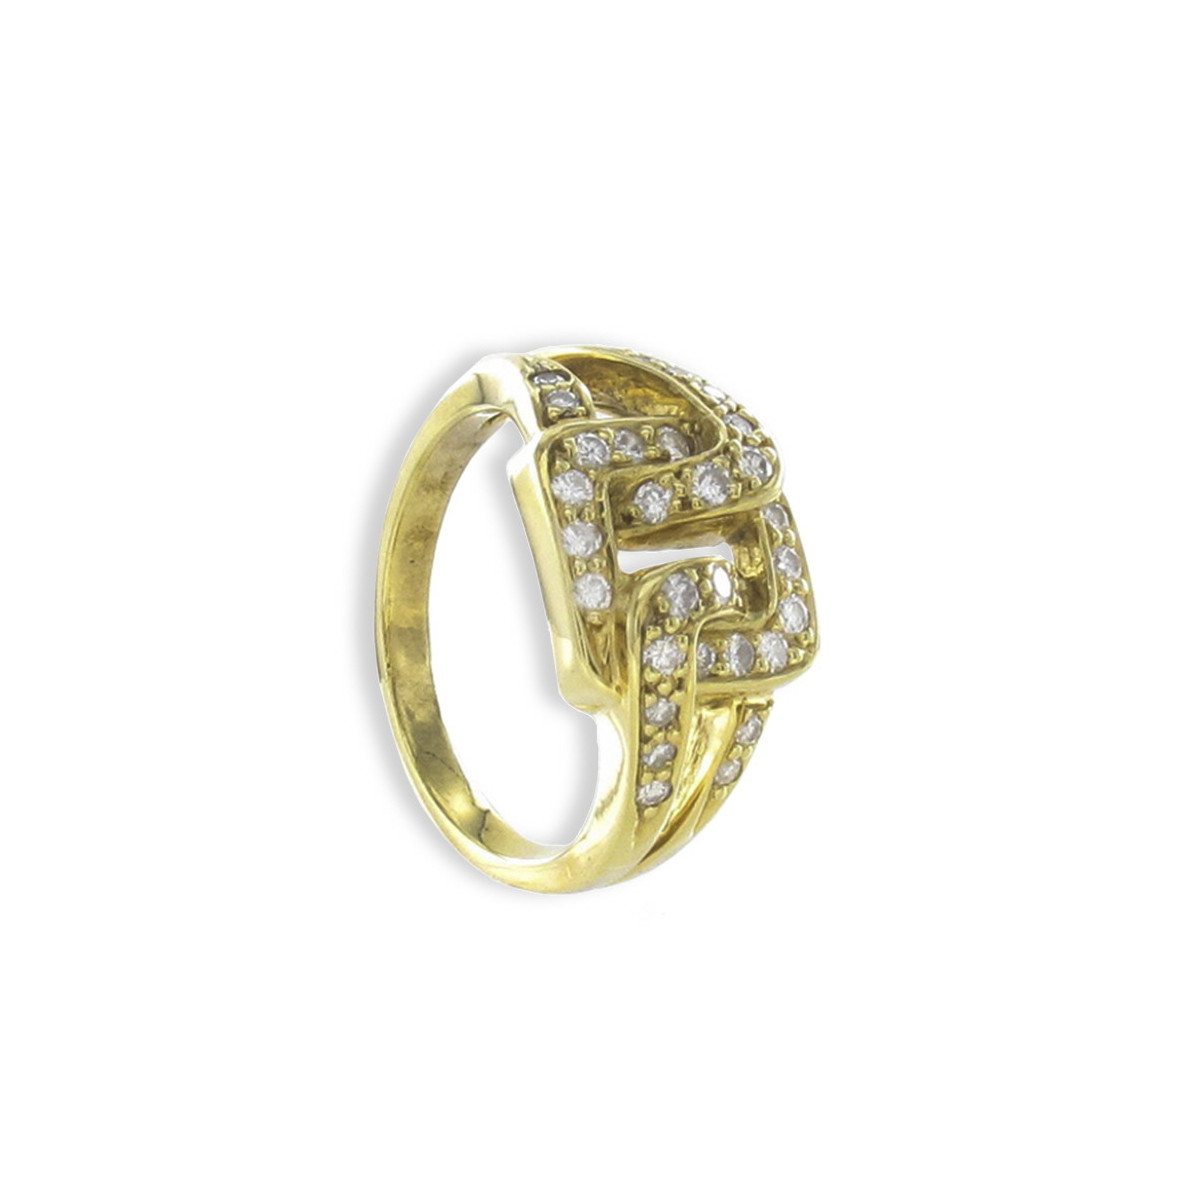 GOLD AND DIAMONDS LINK RING